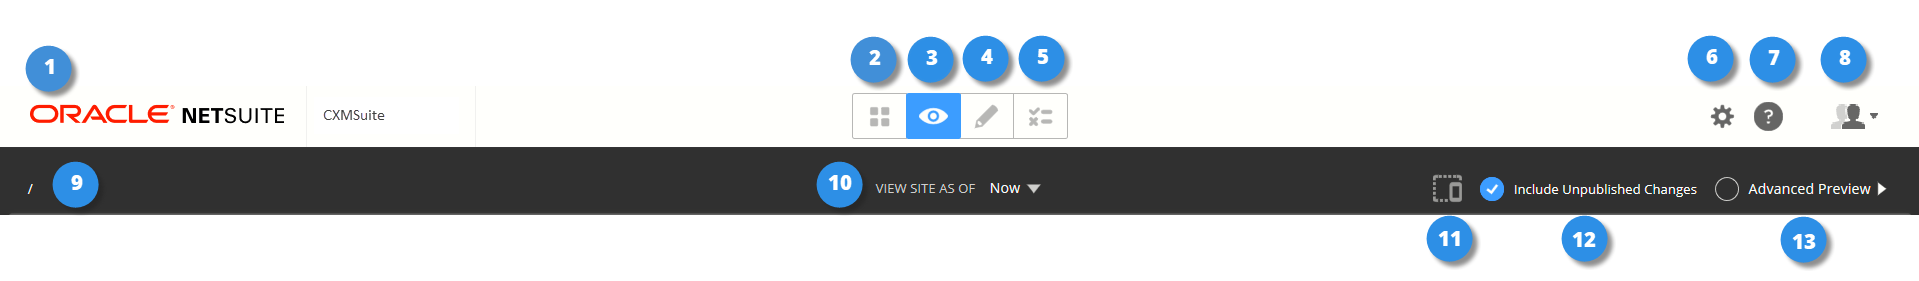 An example of the toolbar.